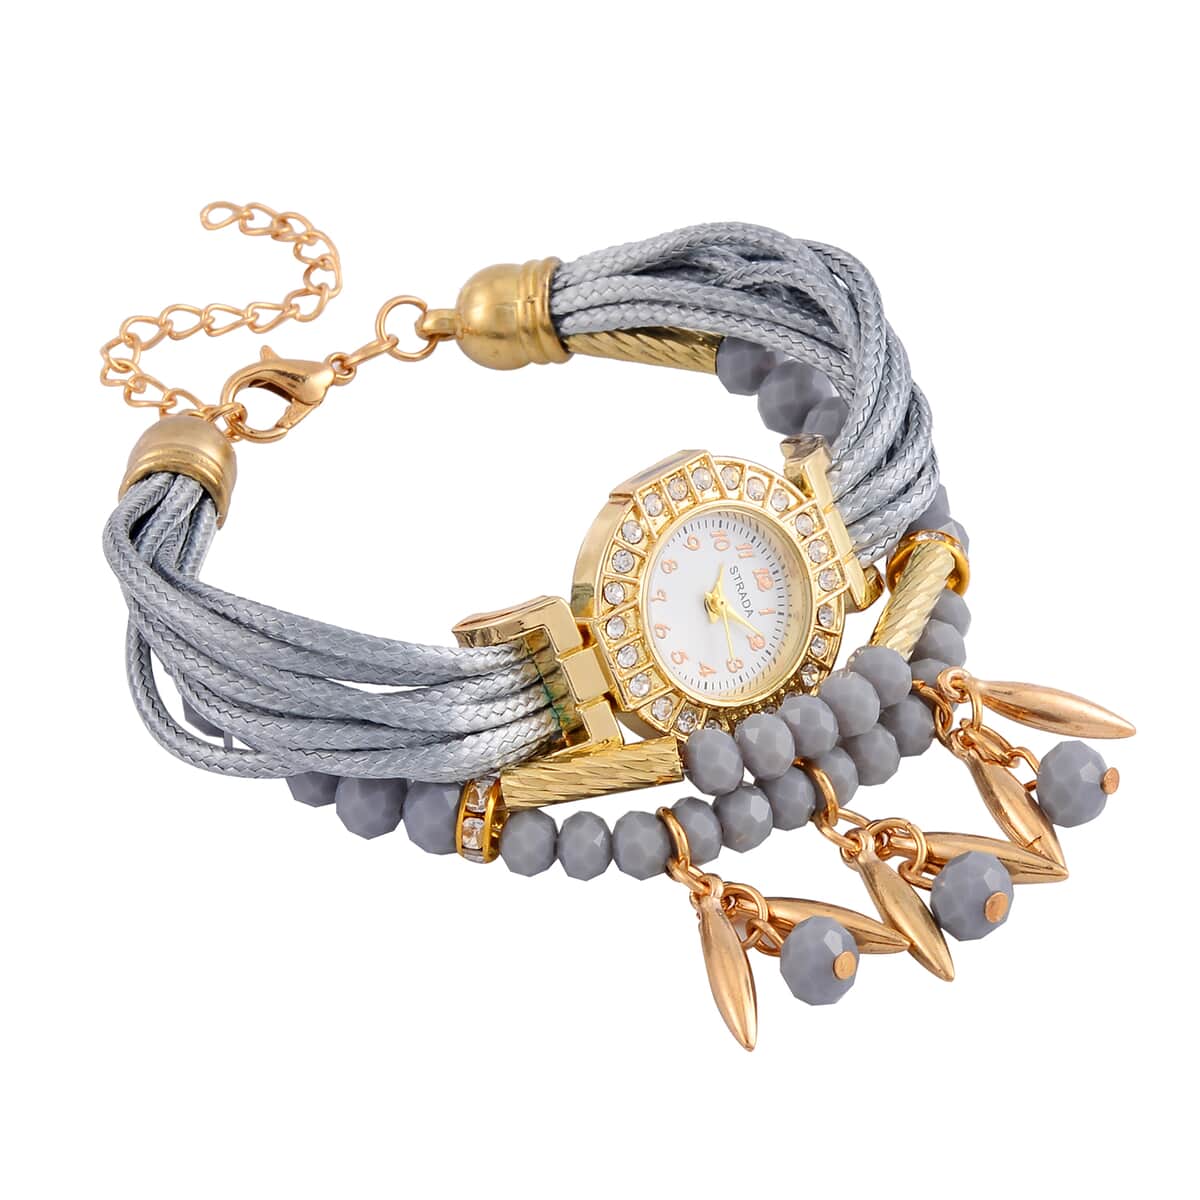 Strada Austrian Crystal, Gray Pearl Glass and Resin Japanese Movement Bracelet Watch in Goldtone with Gray Nylon Strap (25.4 mm) (8.00-9.00 Inches) image number 2